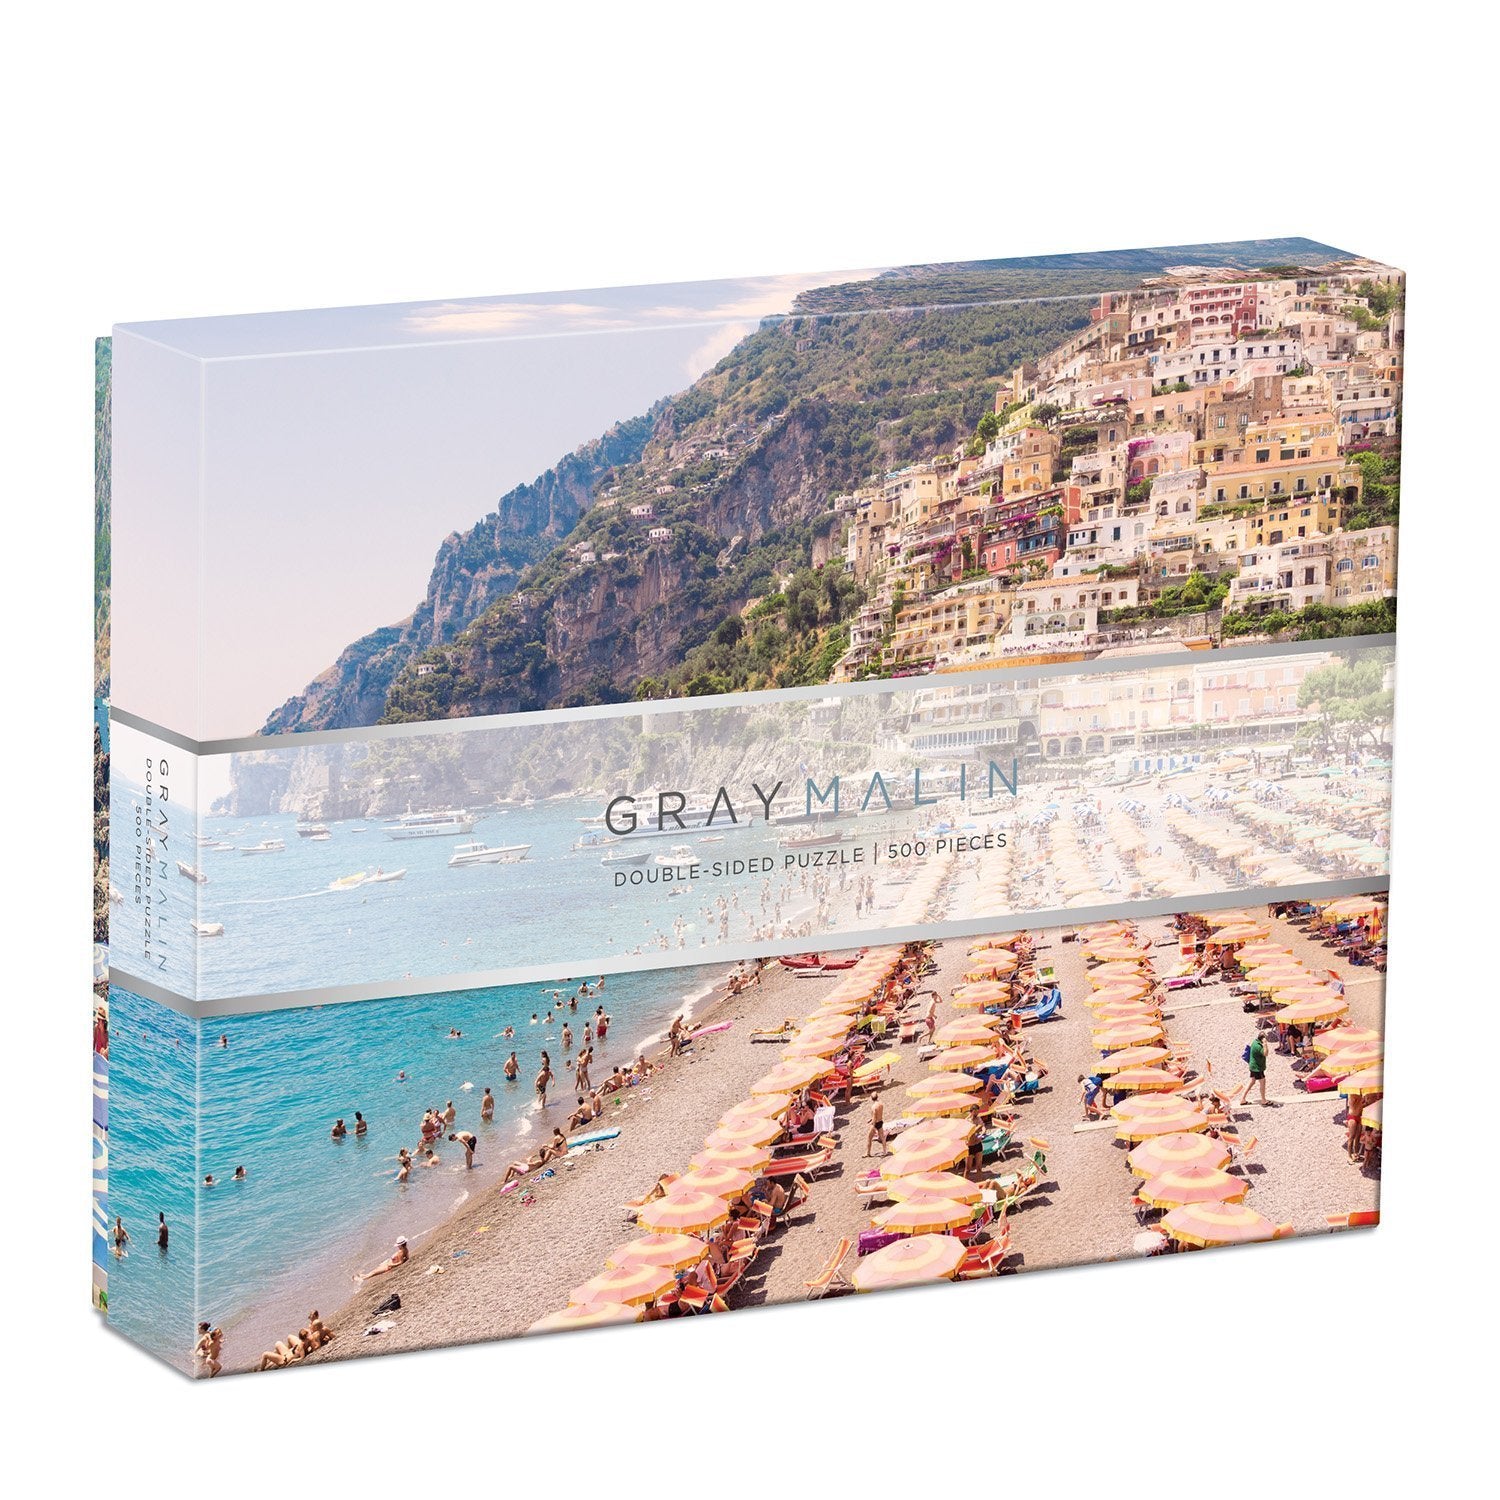 Gray Malin - The Italy (500 pc double-sided puzzle)